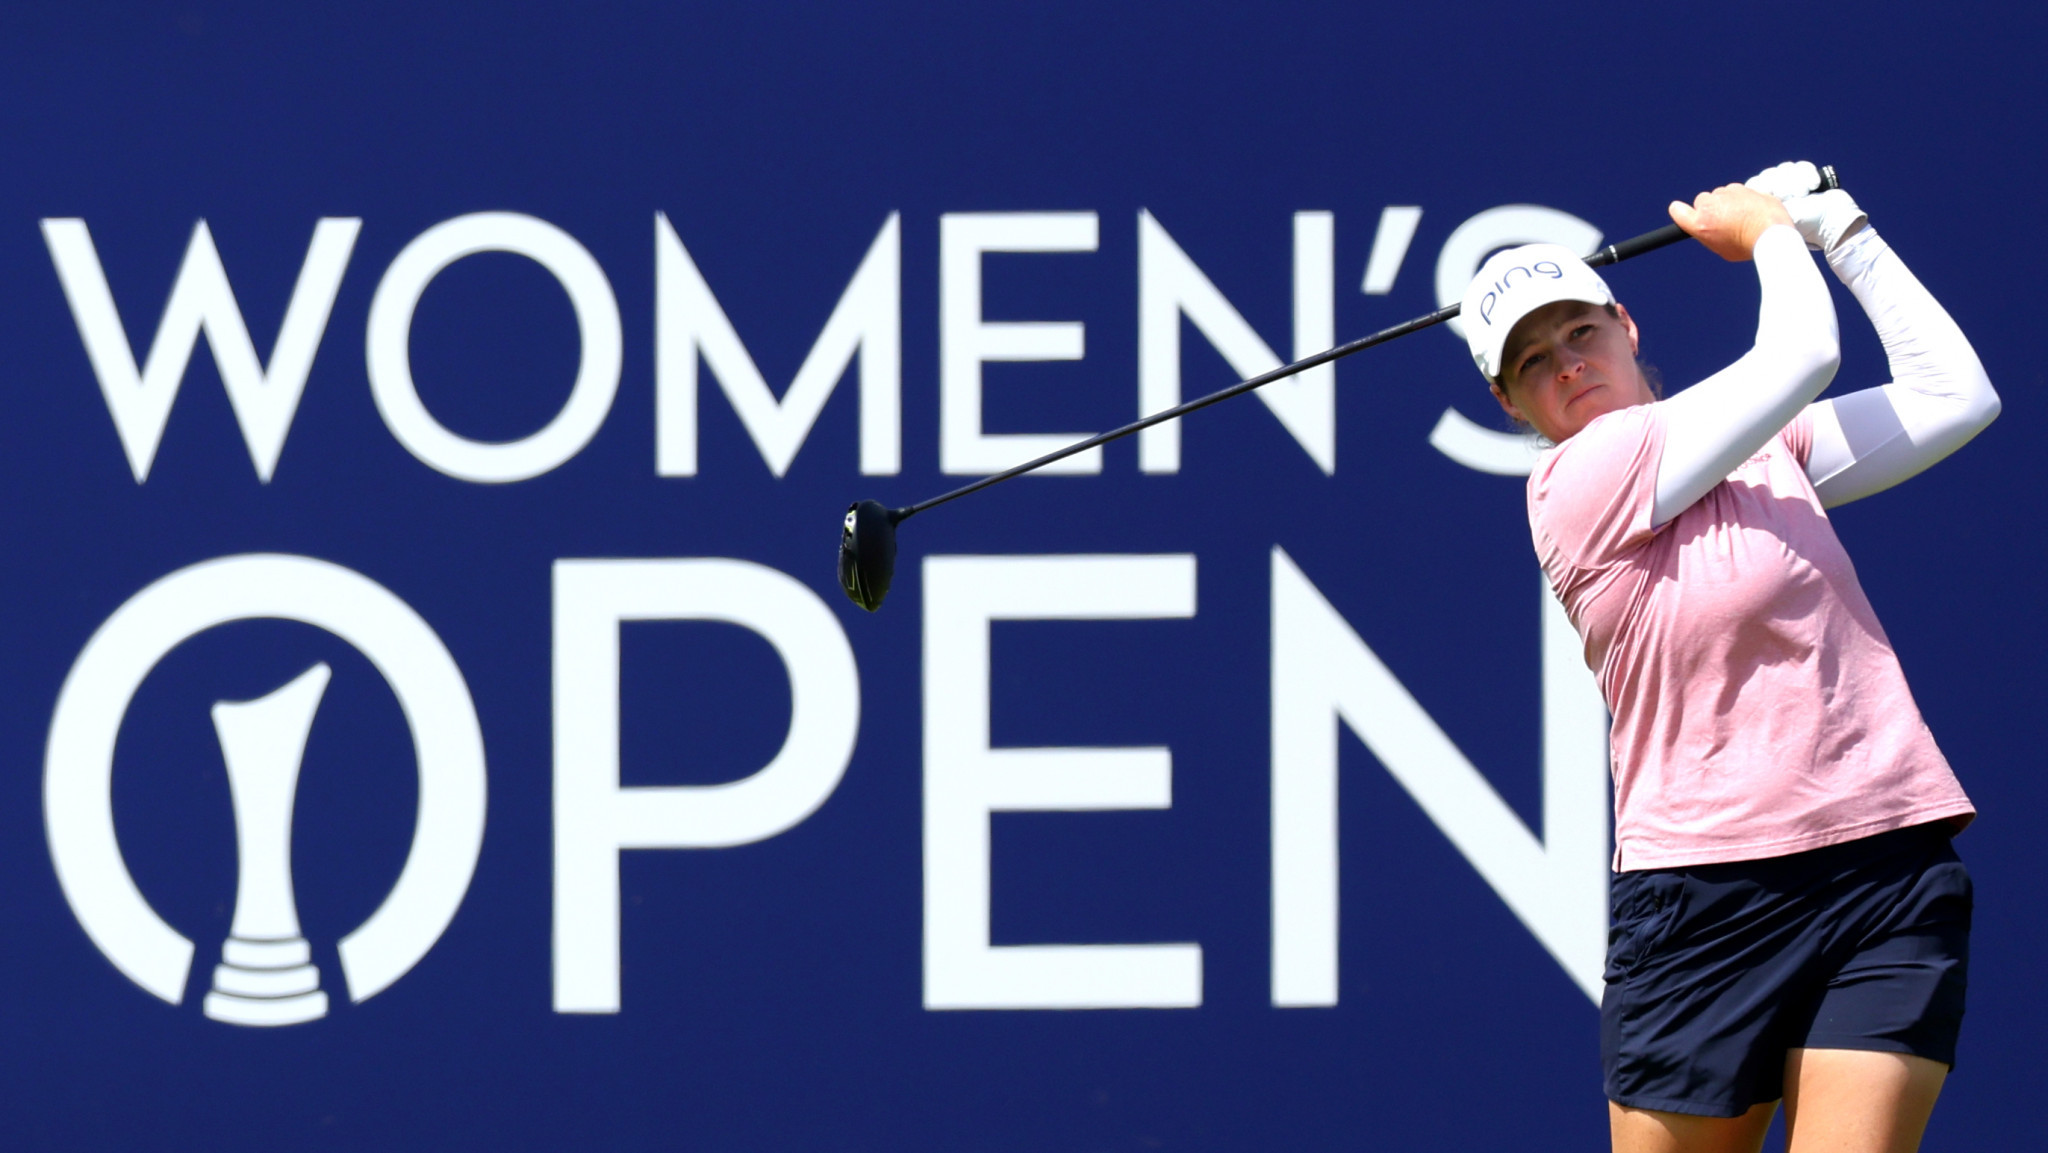 Late eagle sees Ewing surge into pole position at Women's Open